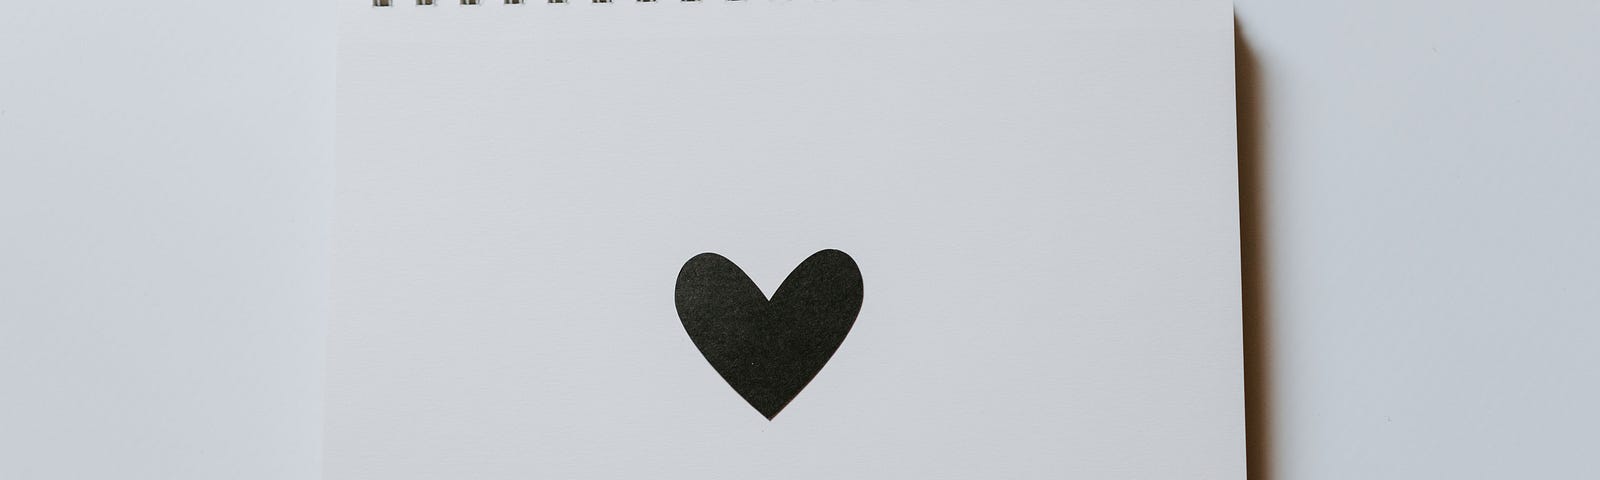 notepad with a heart in the center of it